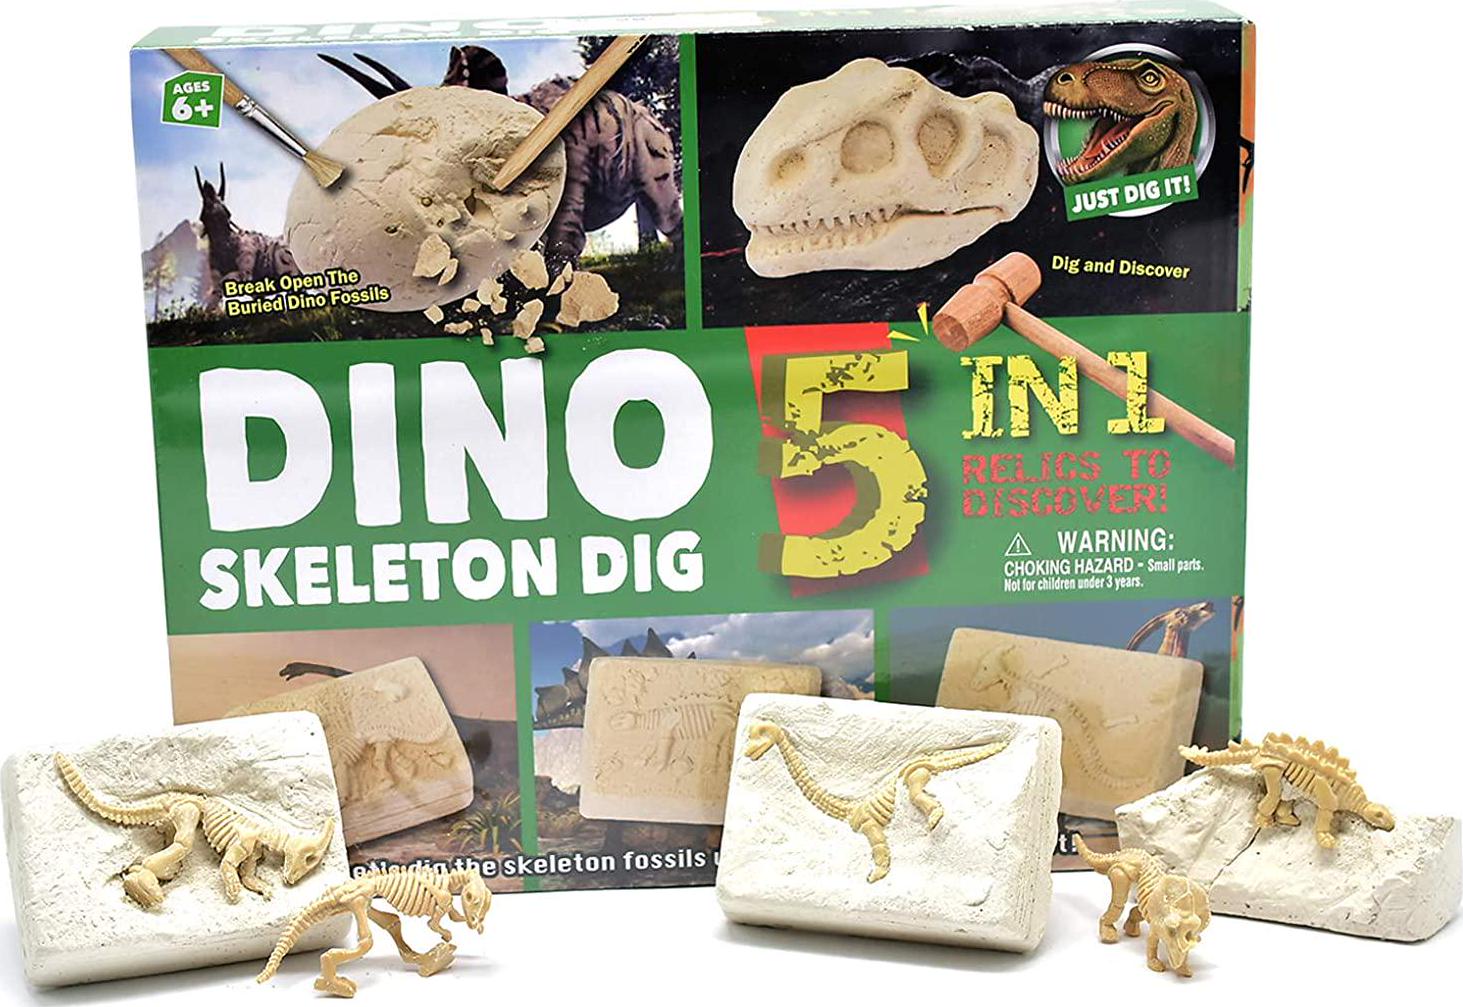 KITEENAL, KITEENAL 5 in 1 Excavation Tool Mining DIY Assembly Model Digging Kit for Kids Geographic Paleontology Dinosaur Fossils Science and Educational Dig Toys Set Gift for Boys Girls Adults